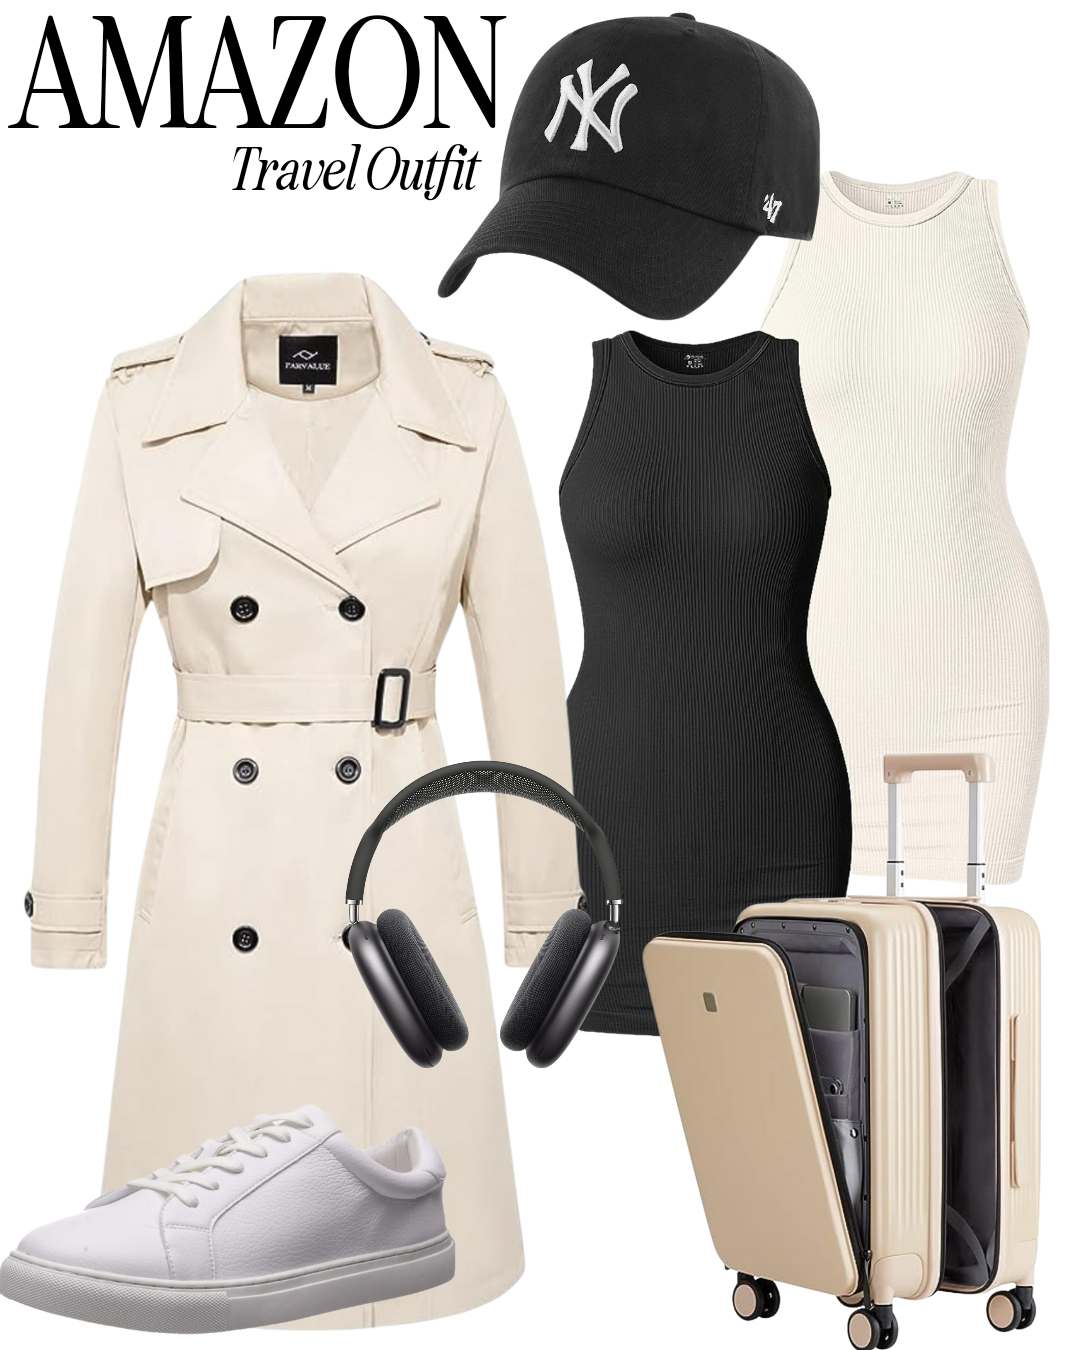 amazon travel outfits